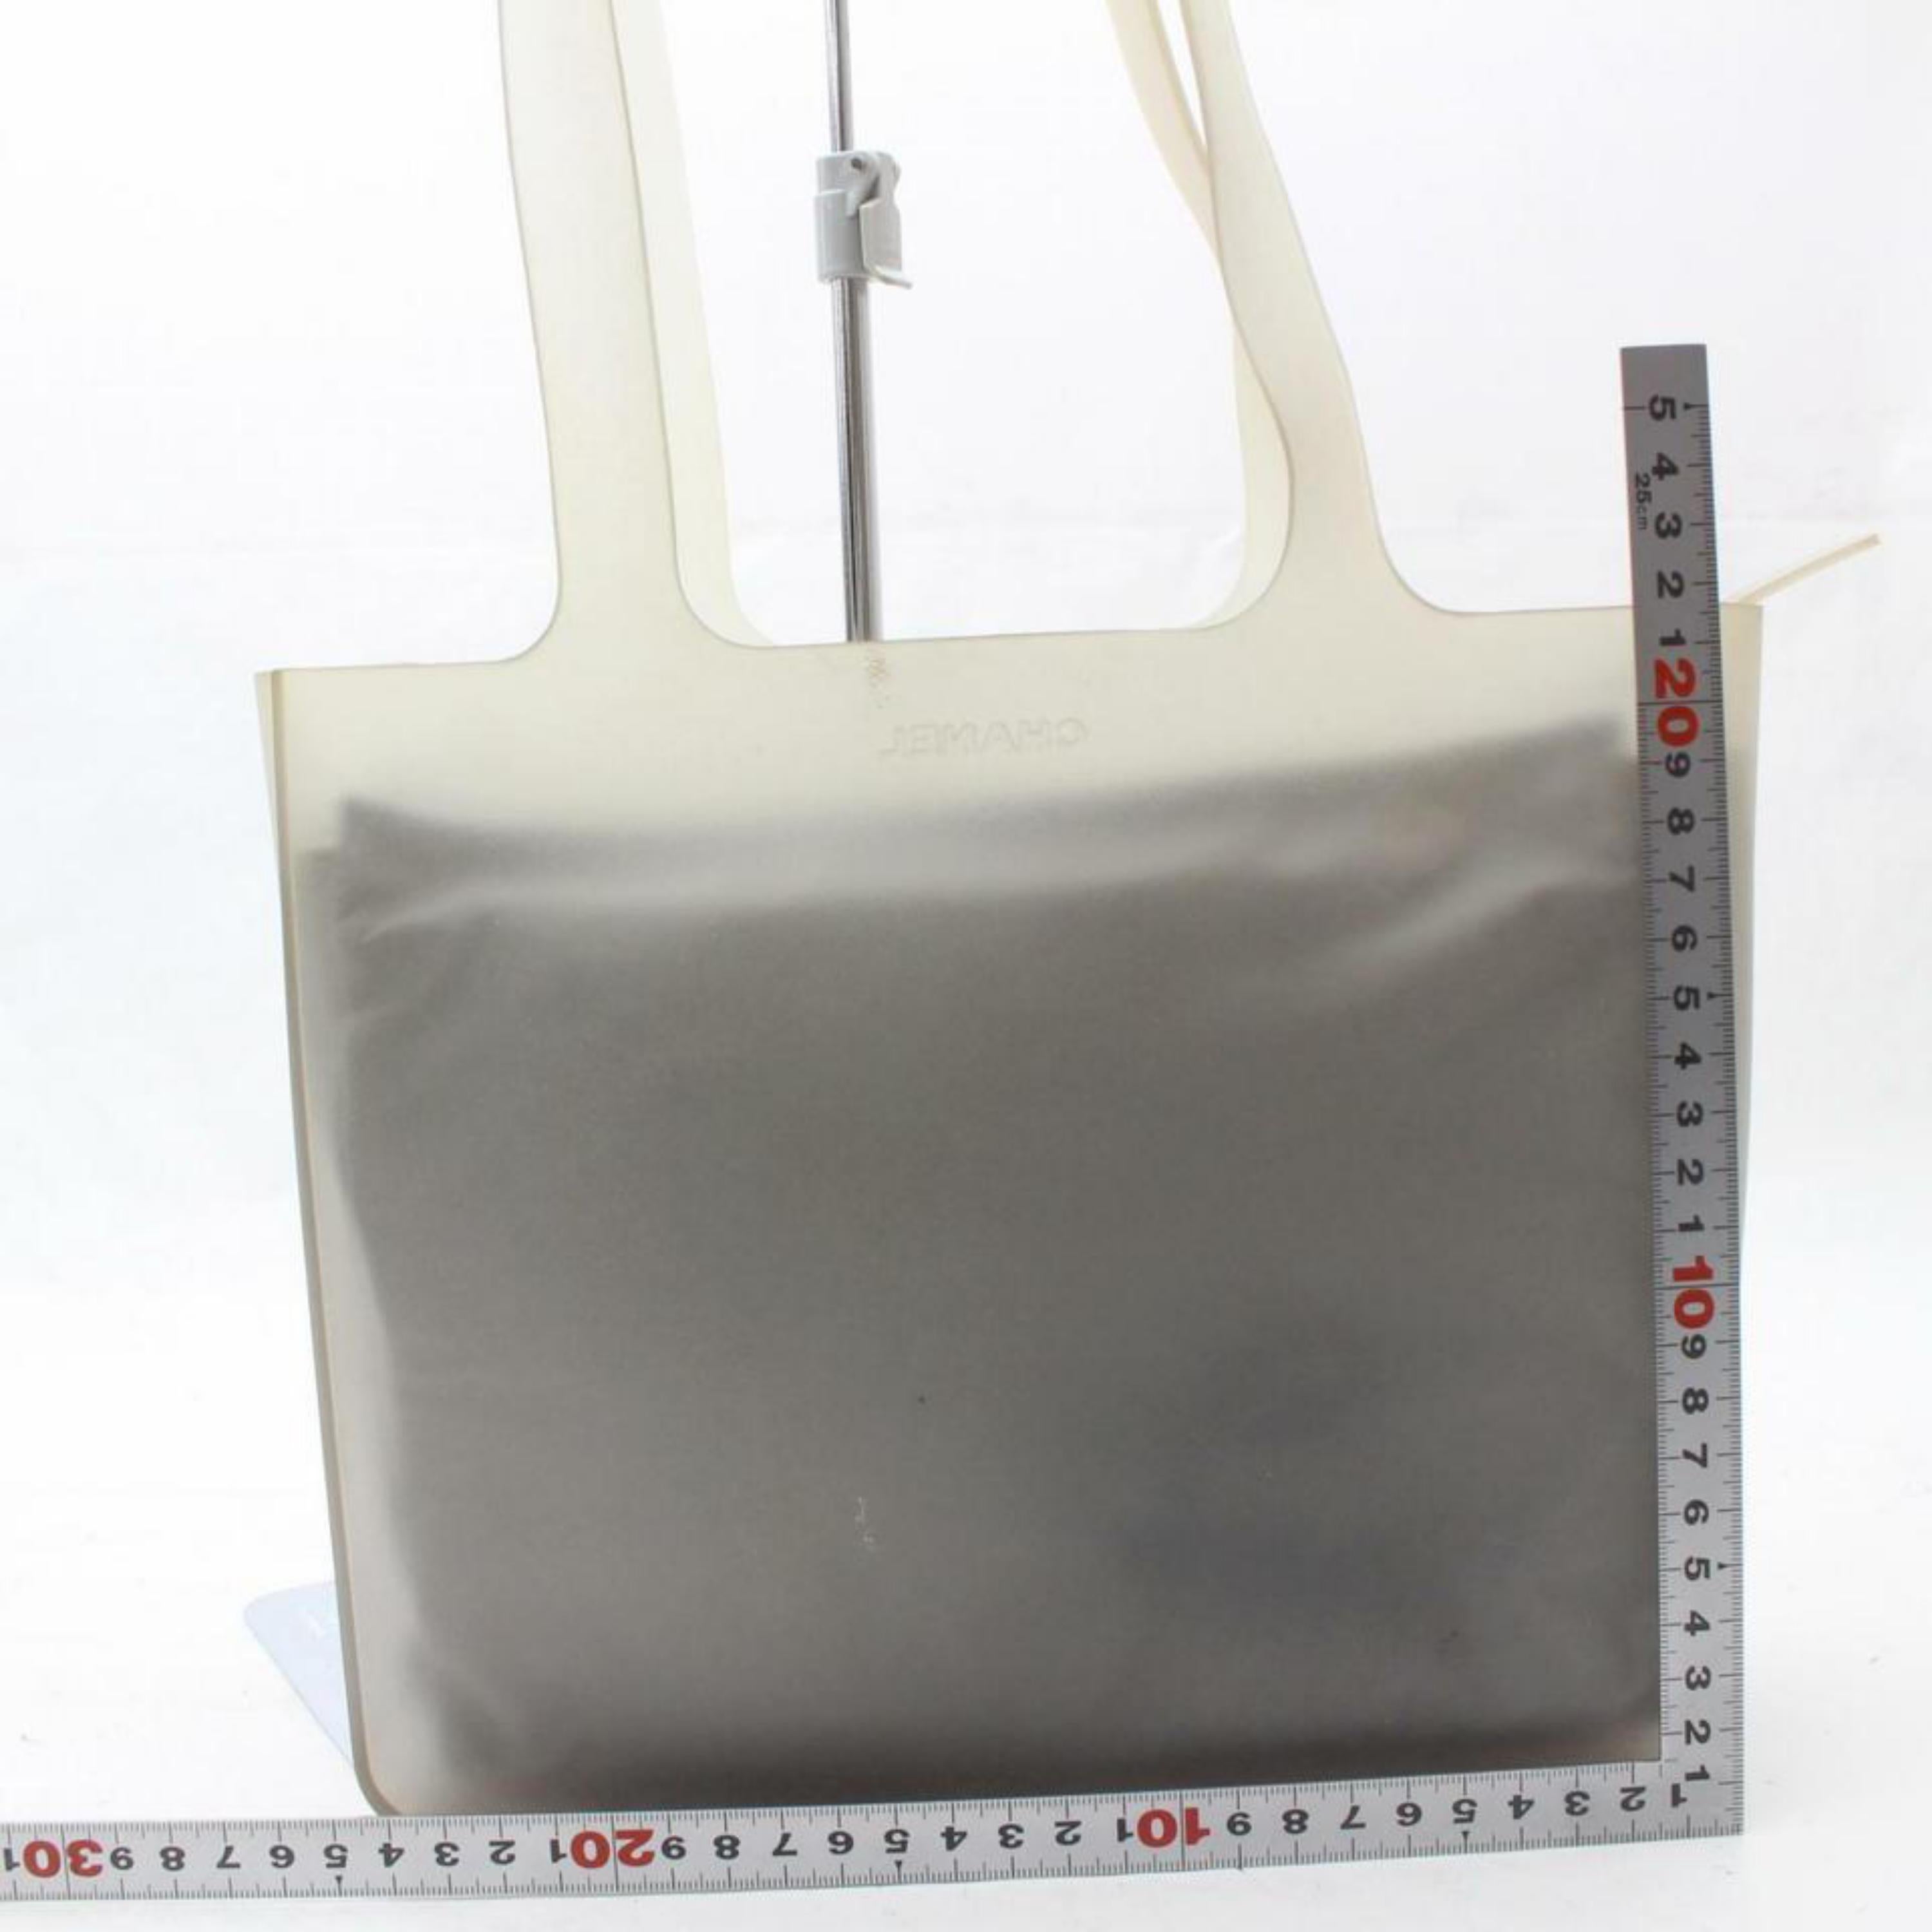 Chanel Translucent Naked Jelly Tote 870004 Gray Polyurethane Shoulder Bag In Good Condition For Sale In Forest Hills, NY